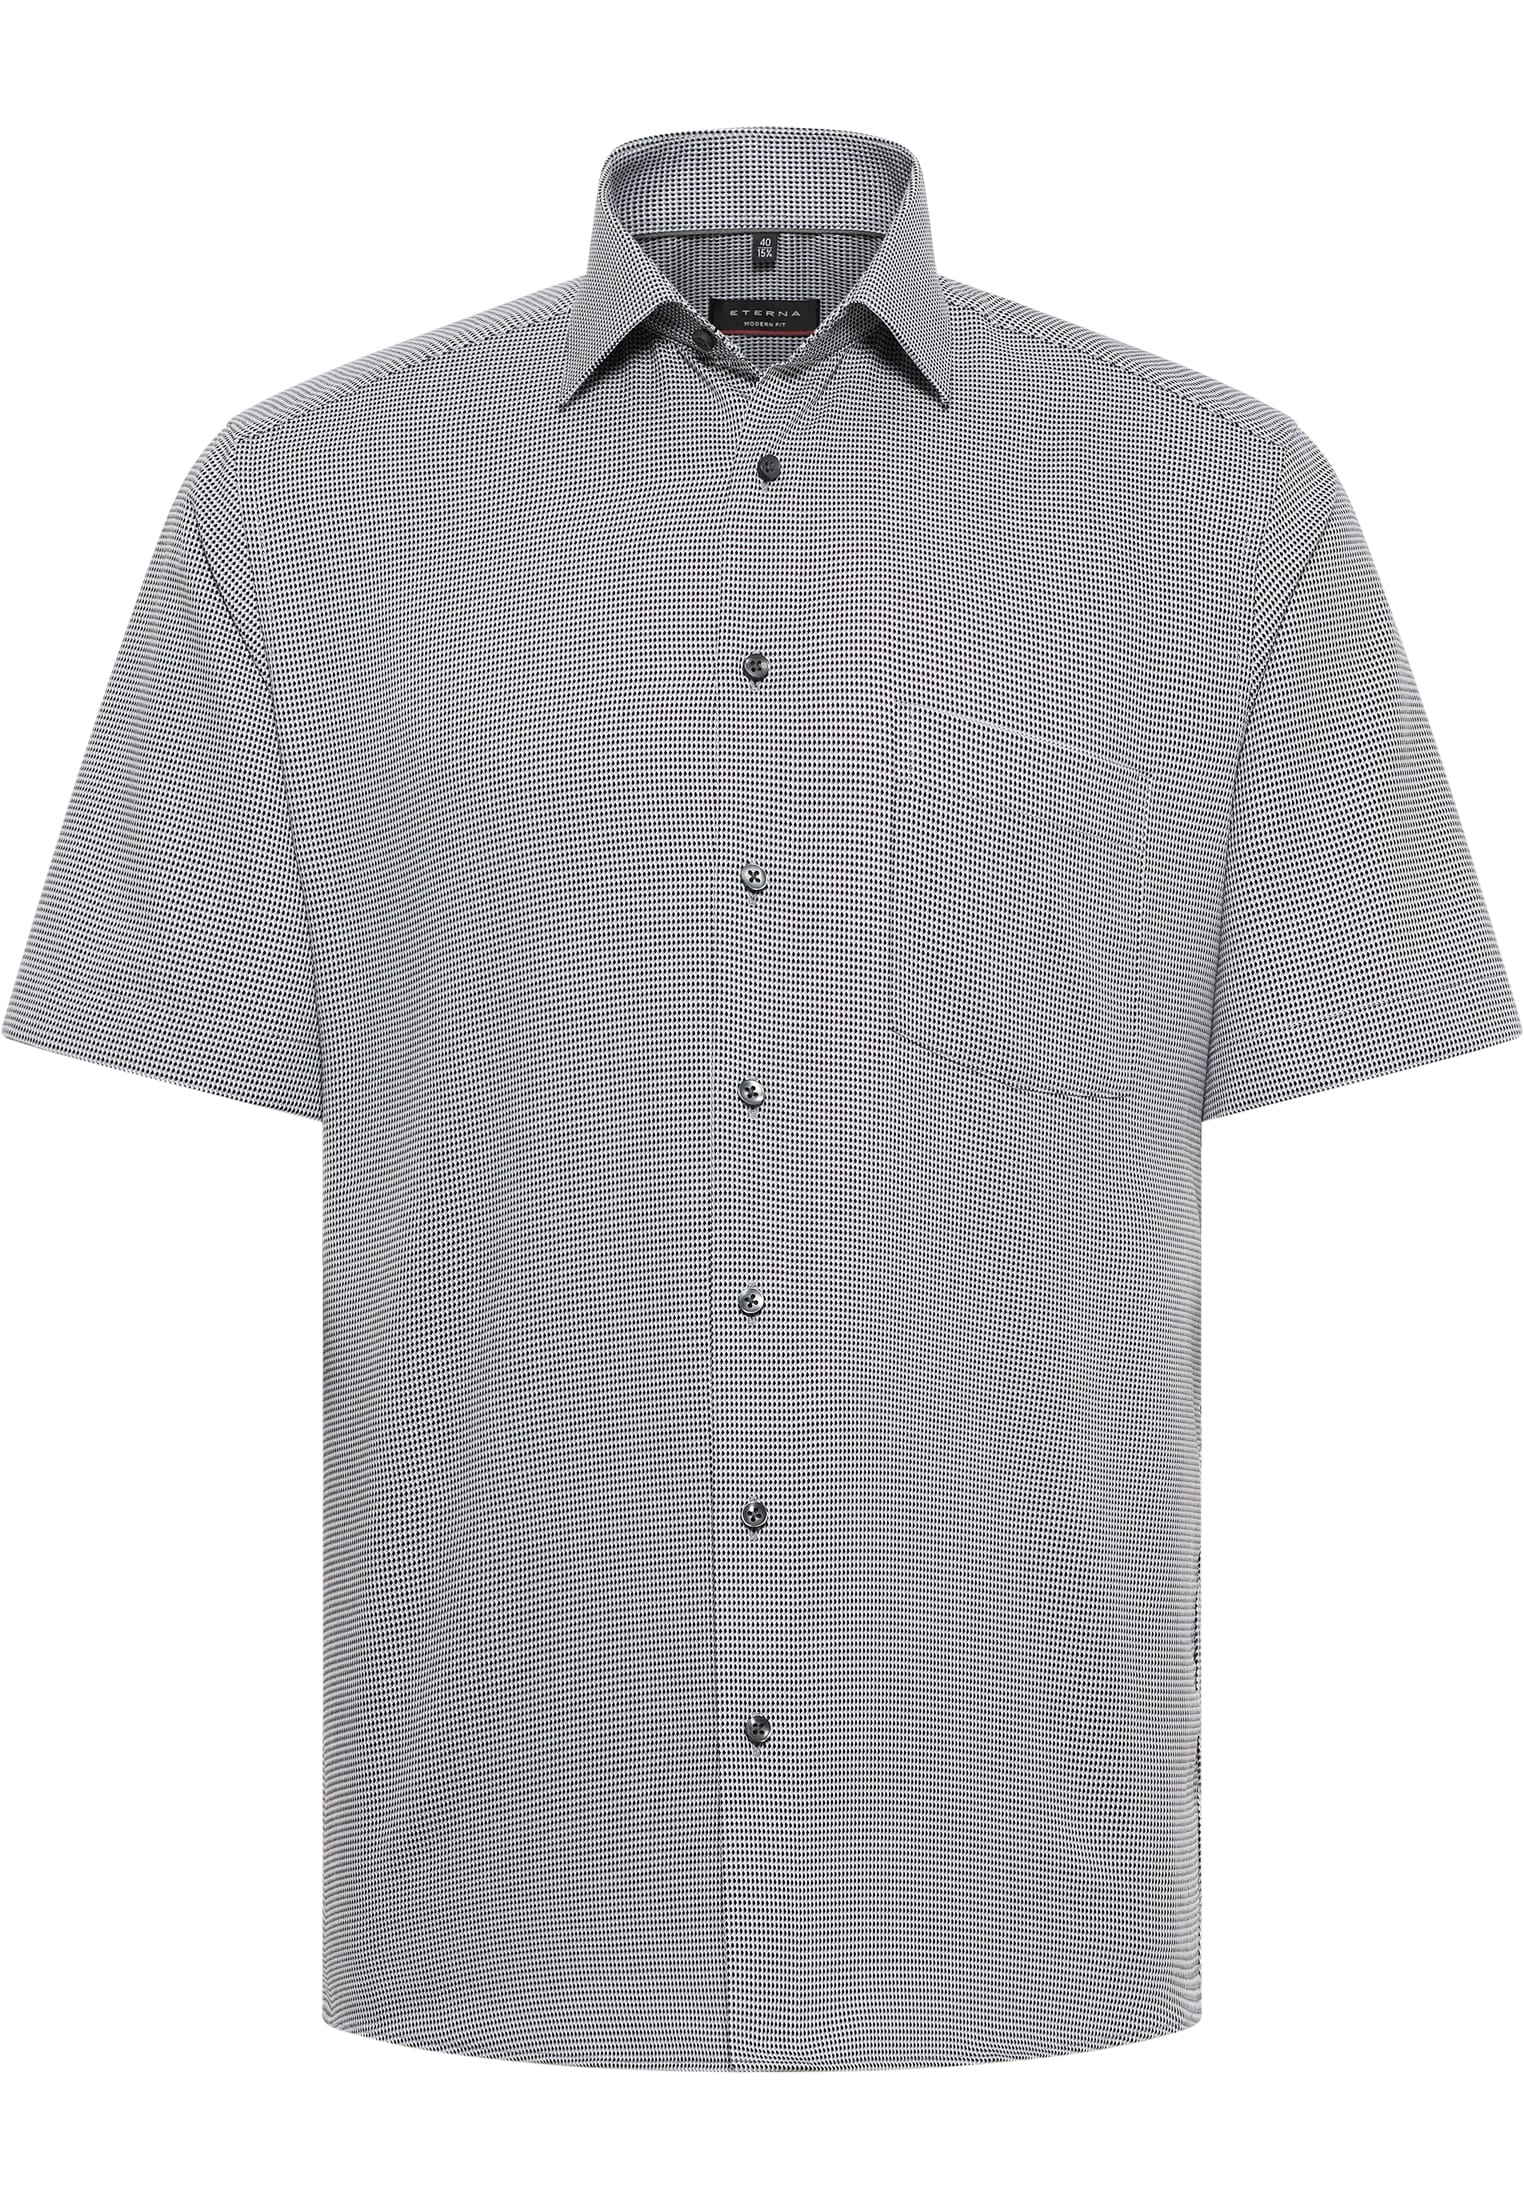 MODERN FIT Shirt in grey structured